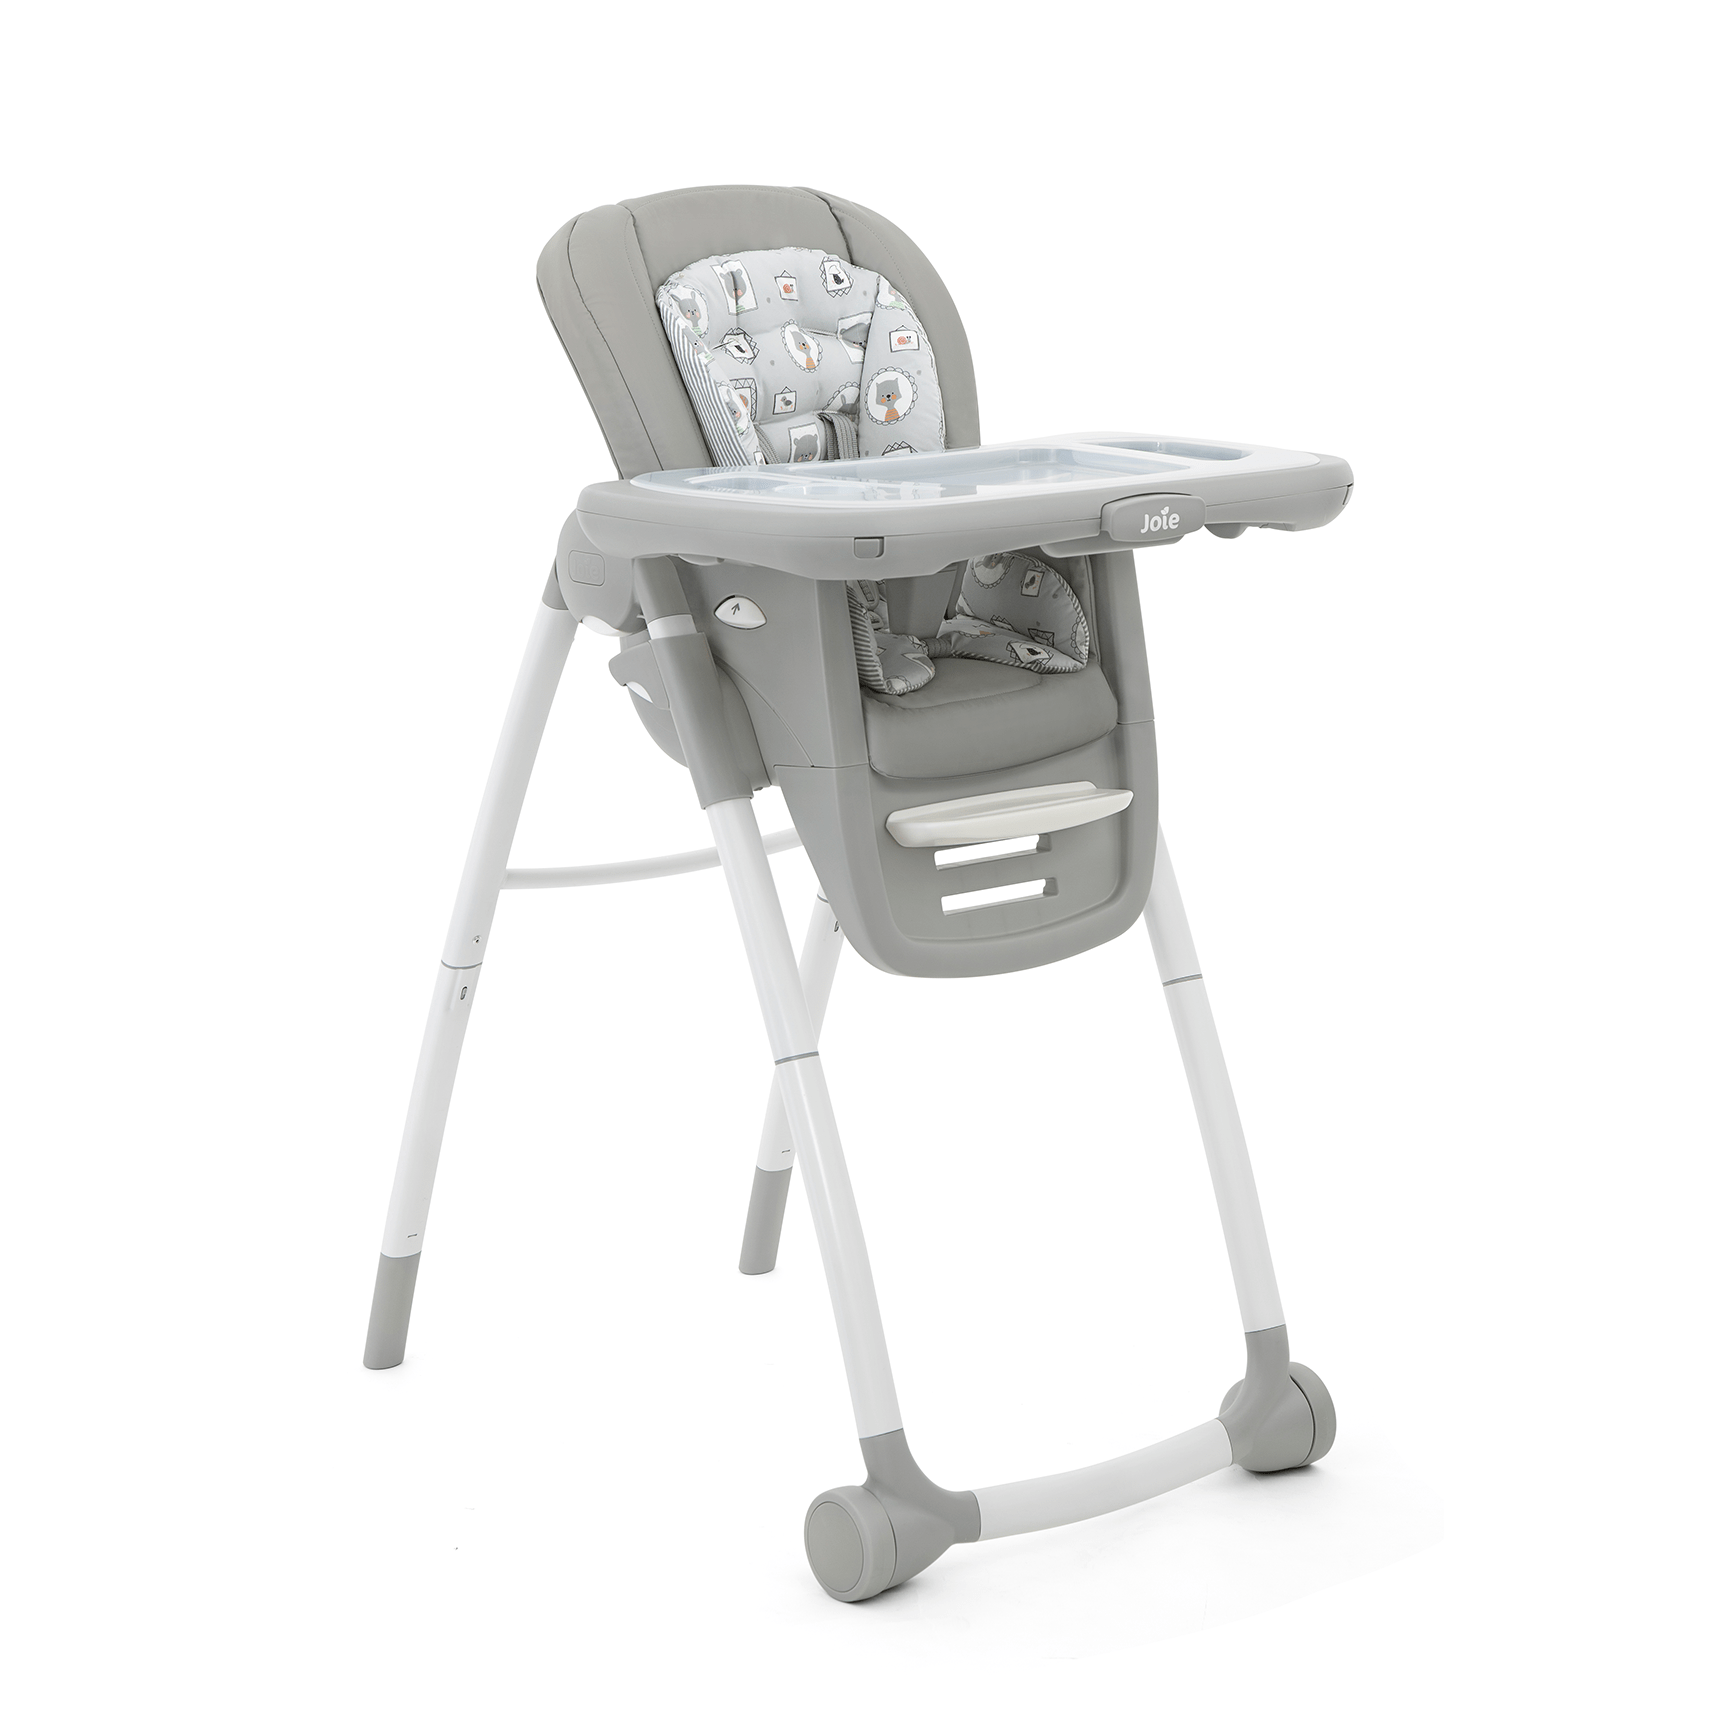 Joie Mimzy Spin Highchair 3in1 in Geometric Mountains